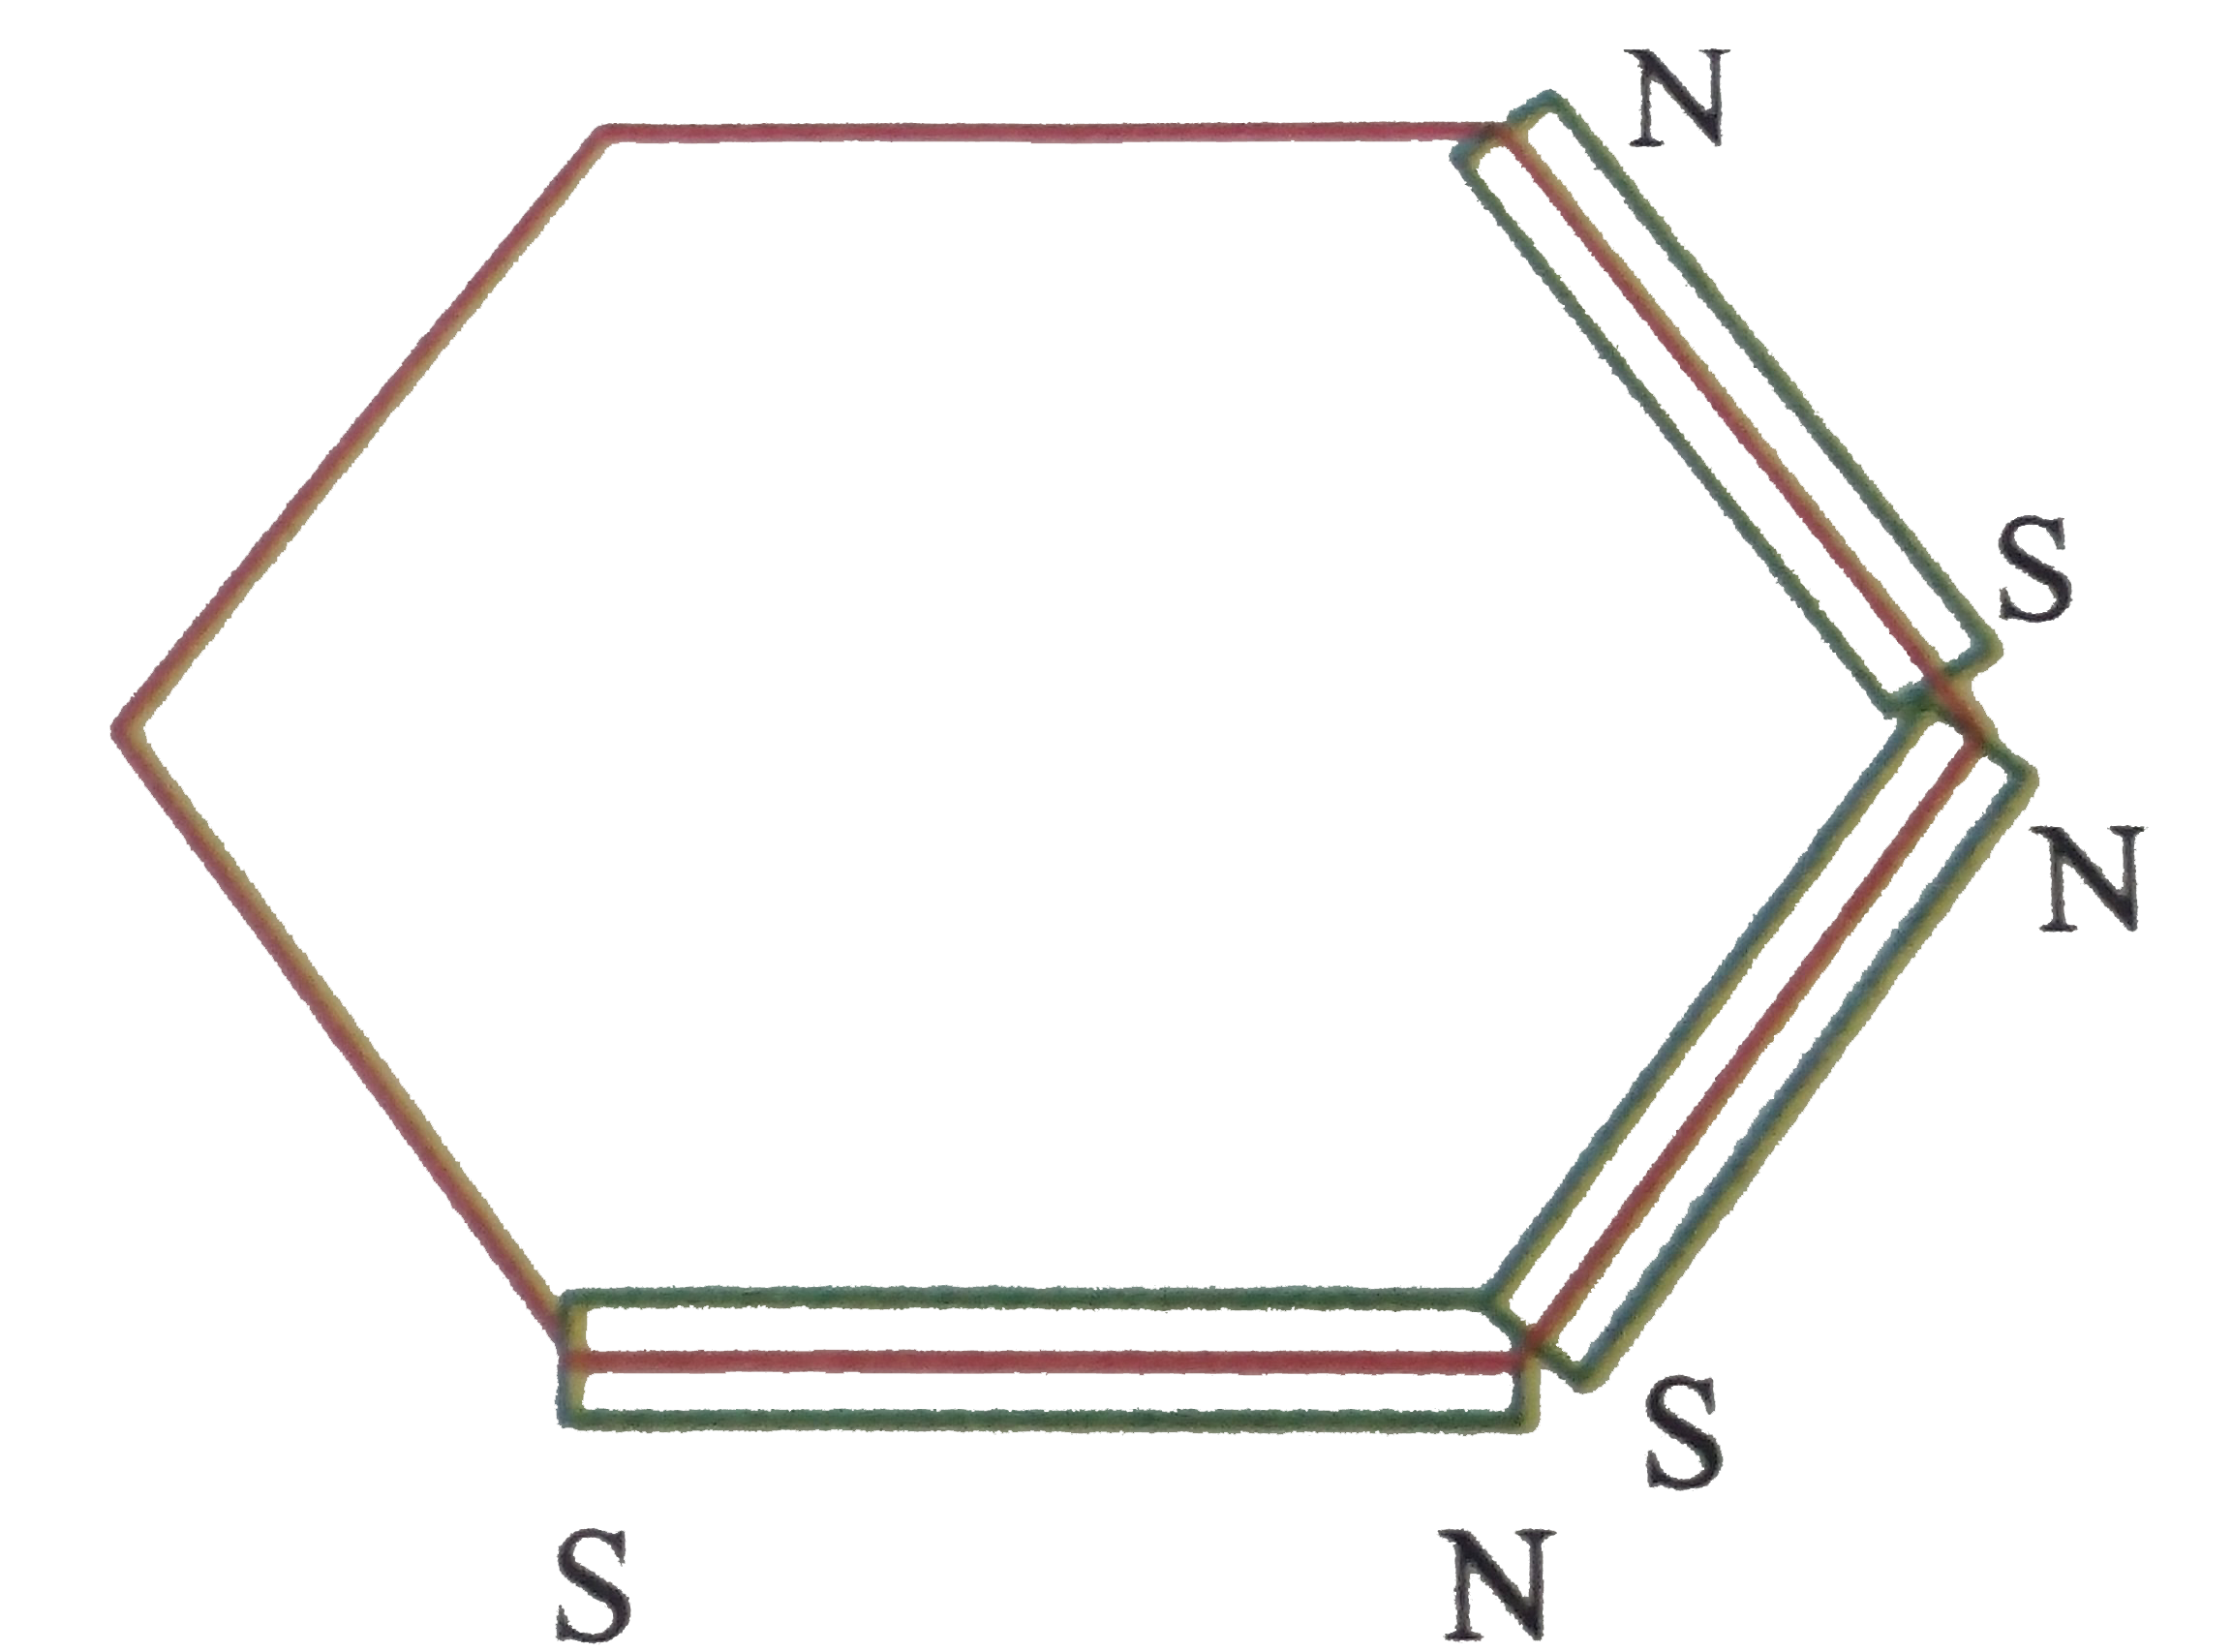 Three identical thin bar magnets each of moment M are placed along three adjacent sides of a regular hexagon as shown in figure. The resultant magnetic moment of the system is